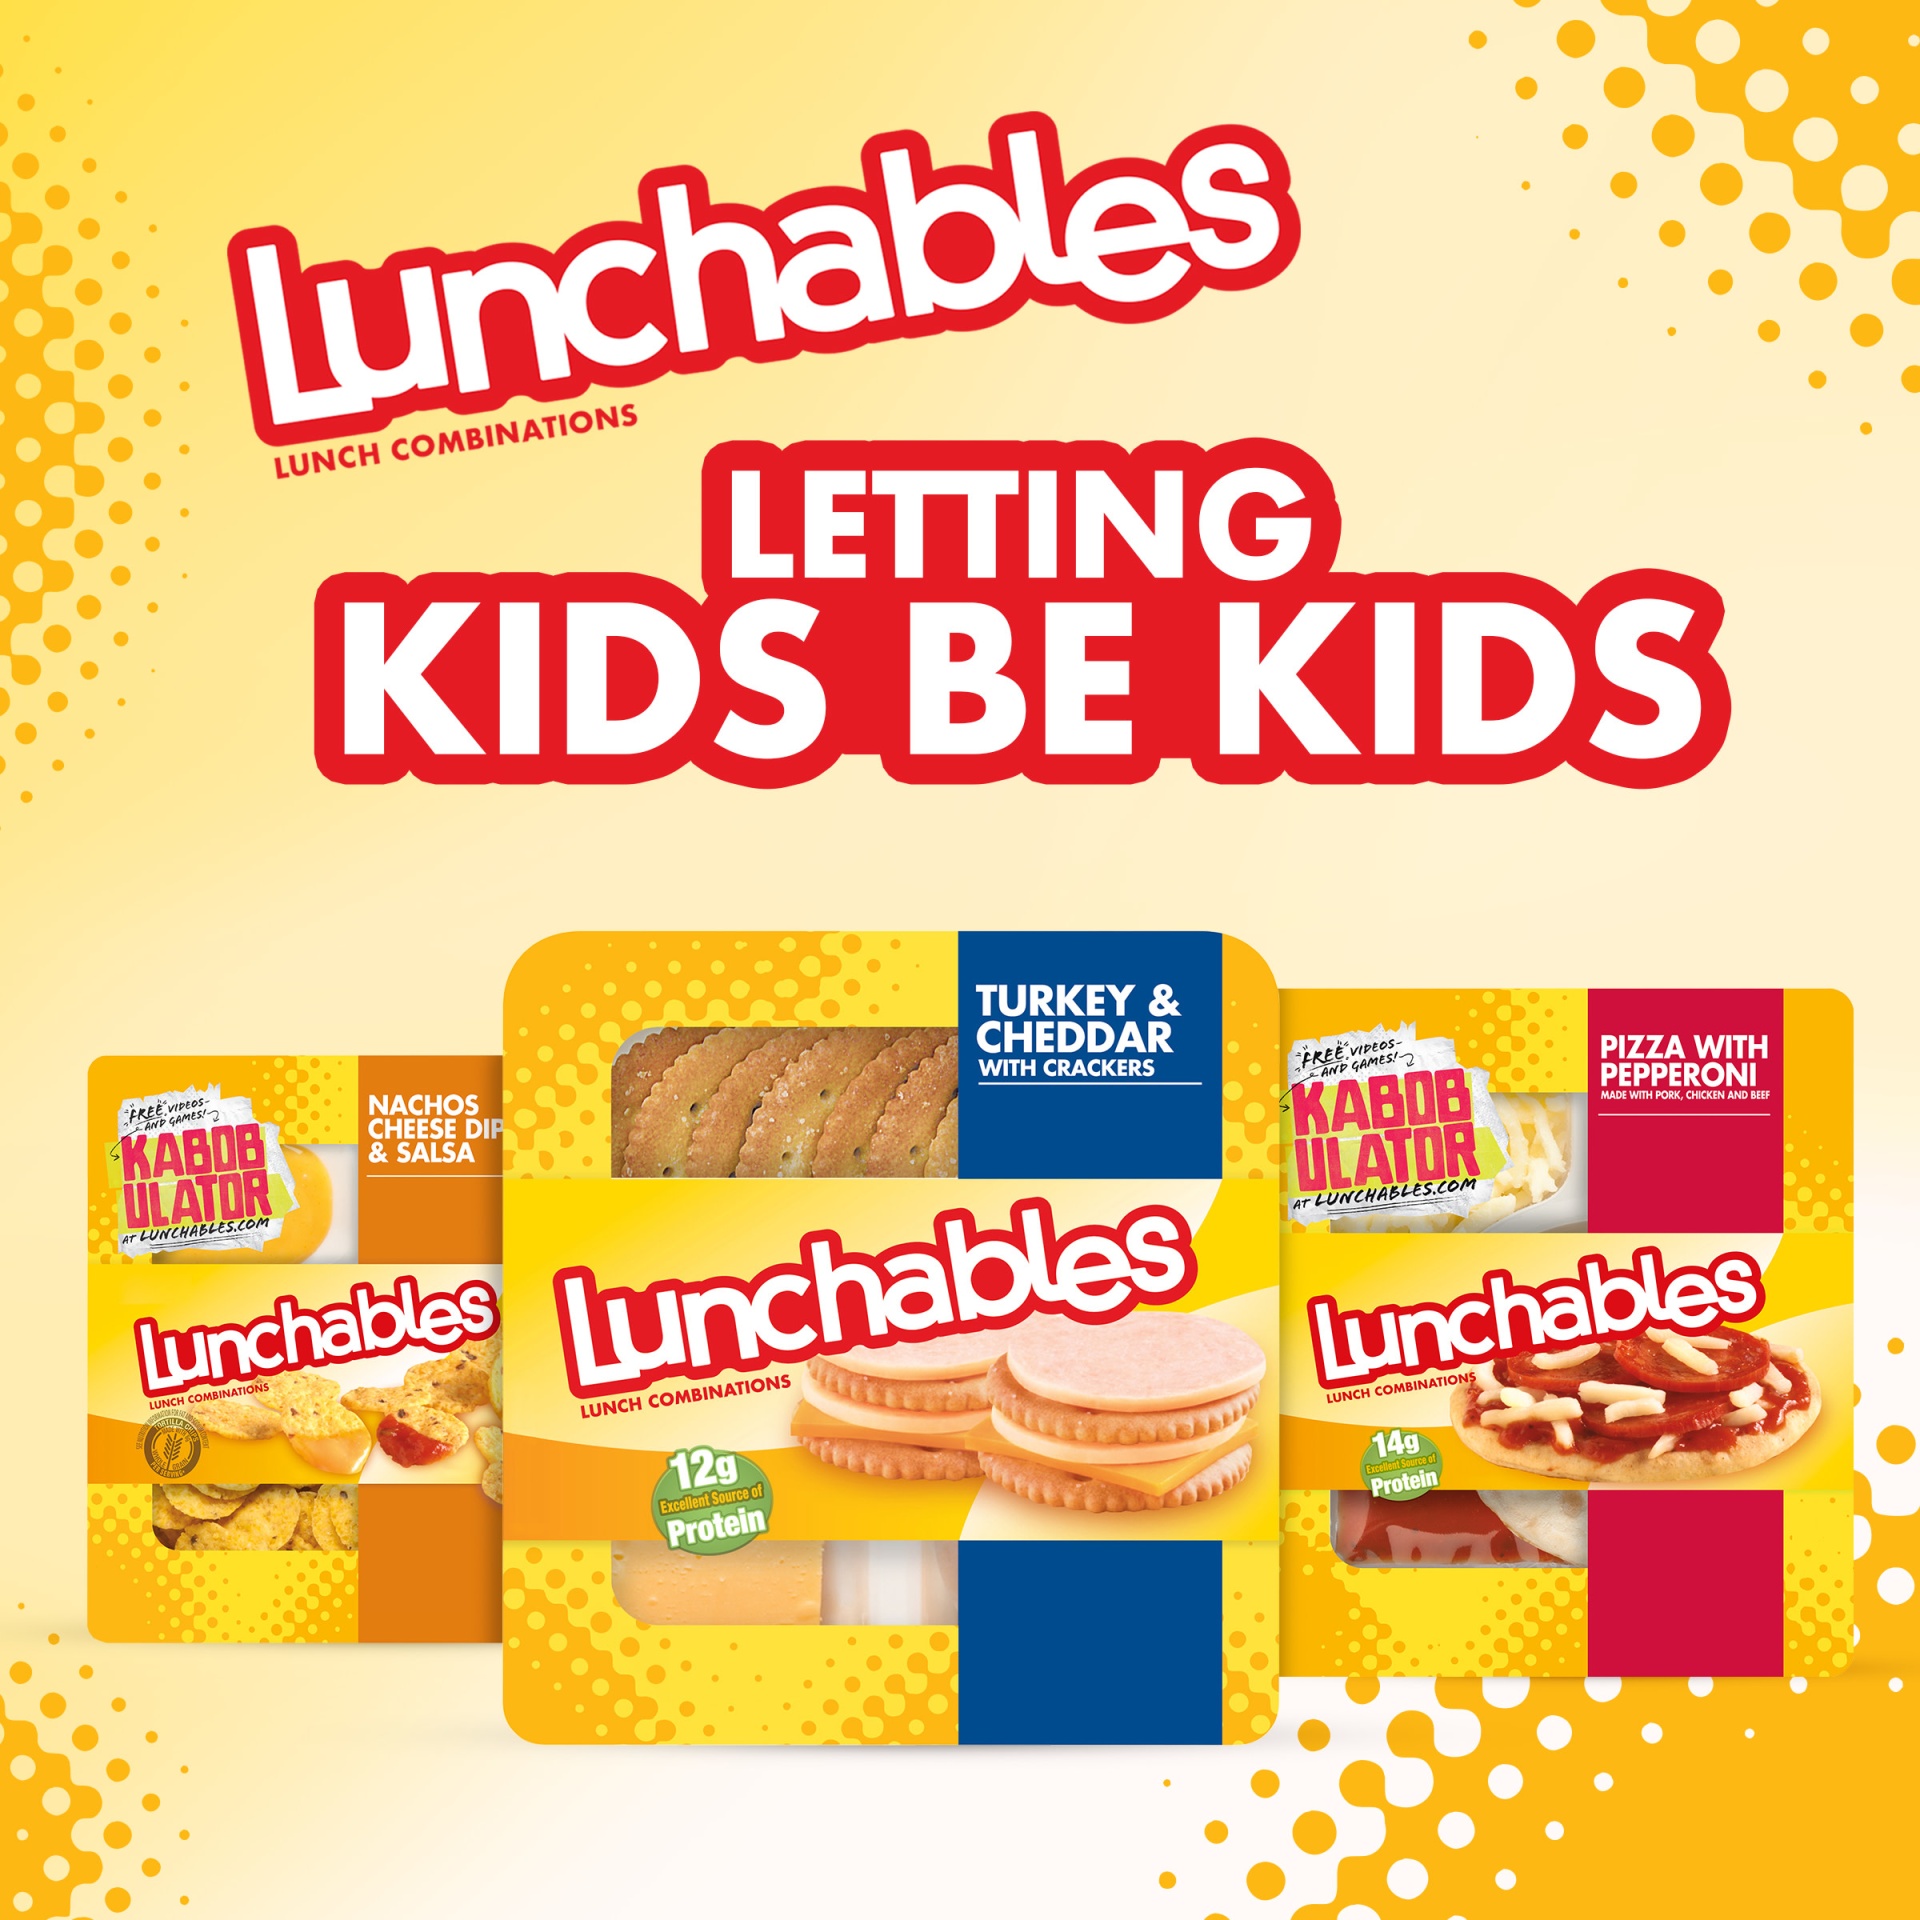 slide 2 of 7, Lunchables Turkey & Cheddar Cheese Snack Kit with Crackers Tray, 3.2 oz